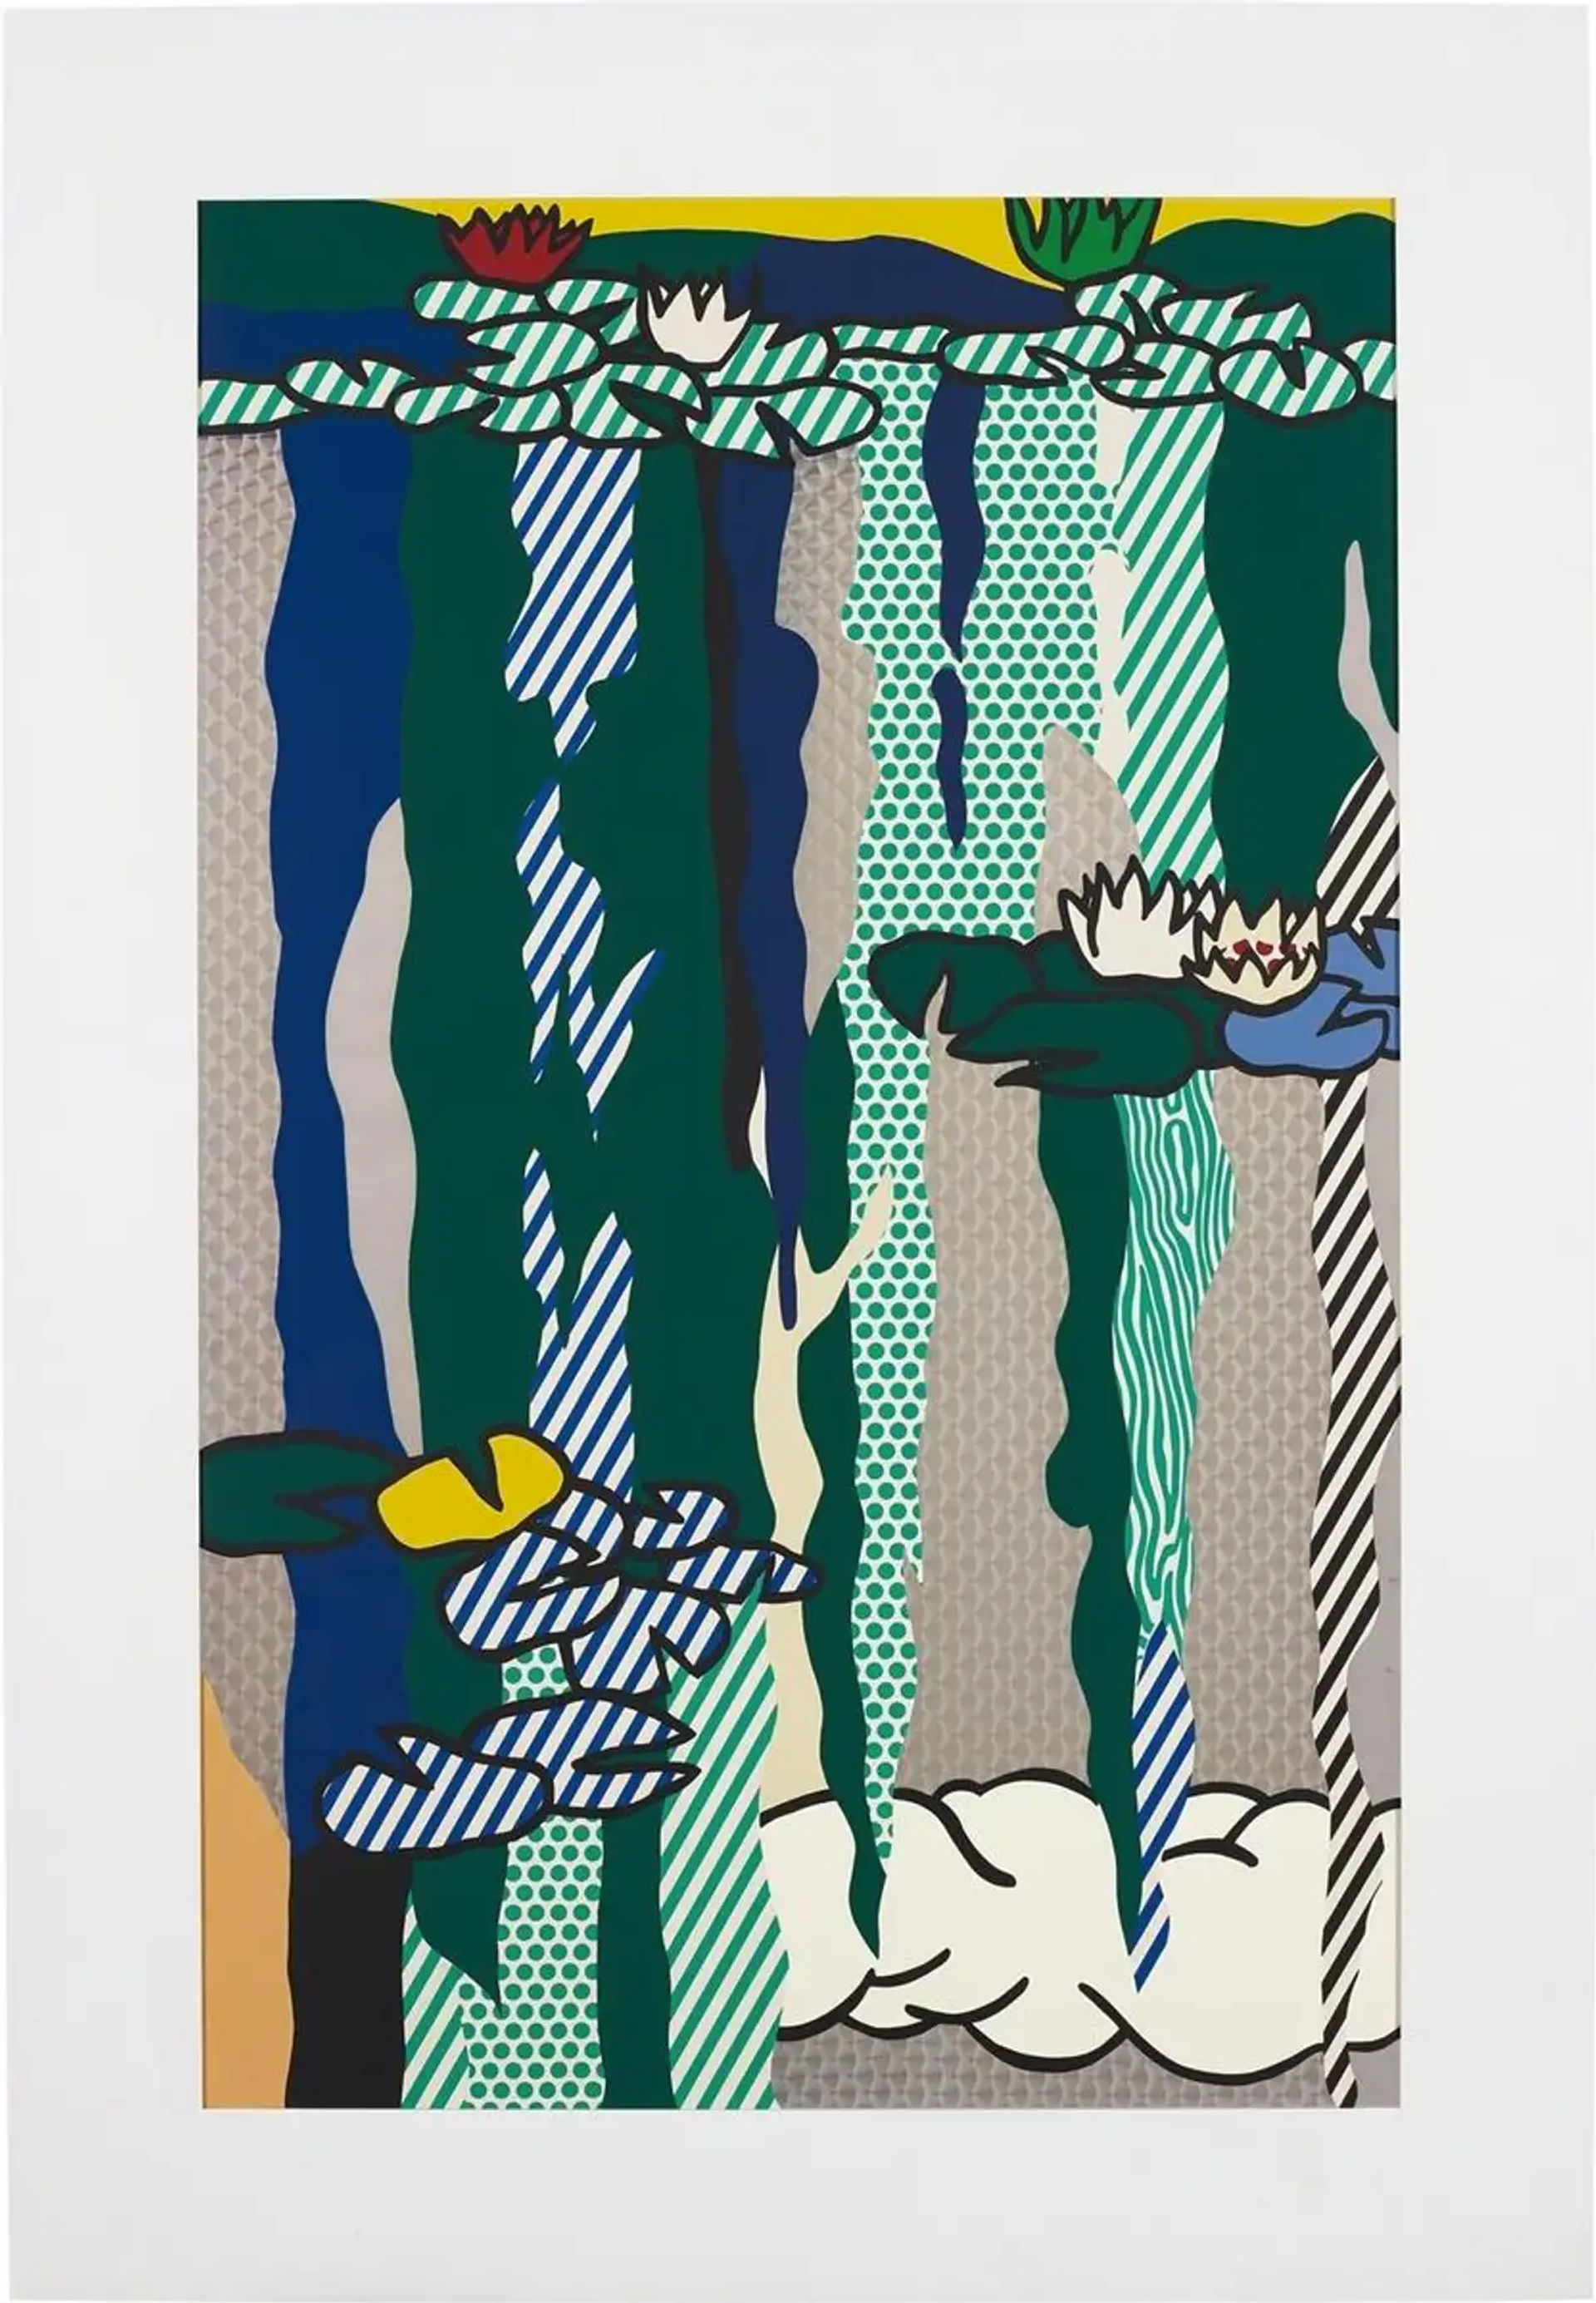 This image shows a print by Roy Lichtenstein. The dense composition incorporates thick diagonal lines, swirly patterns and Ben Day dots in saturated colours. Lichtenstein’s forms suggest vegetation and wood grain as well as the rippled and refracted surface of the water.